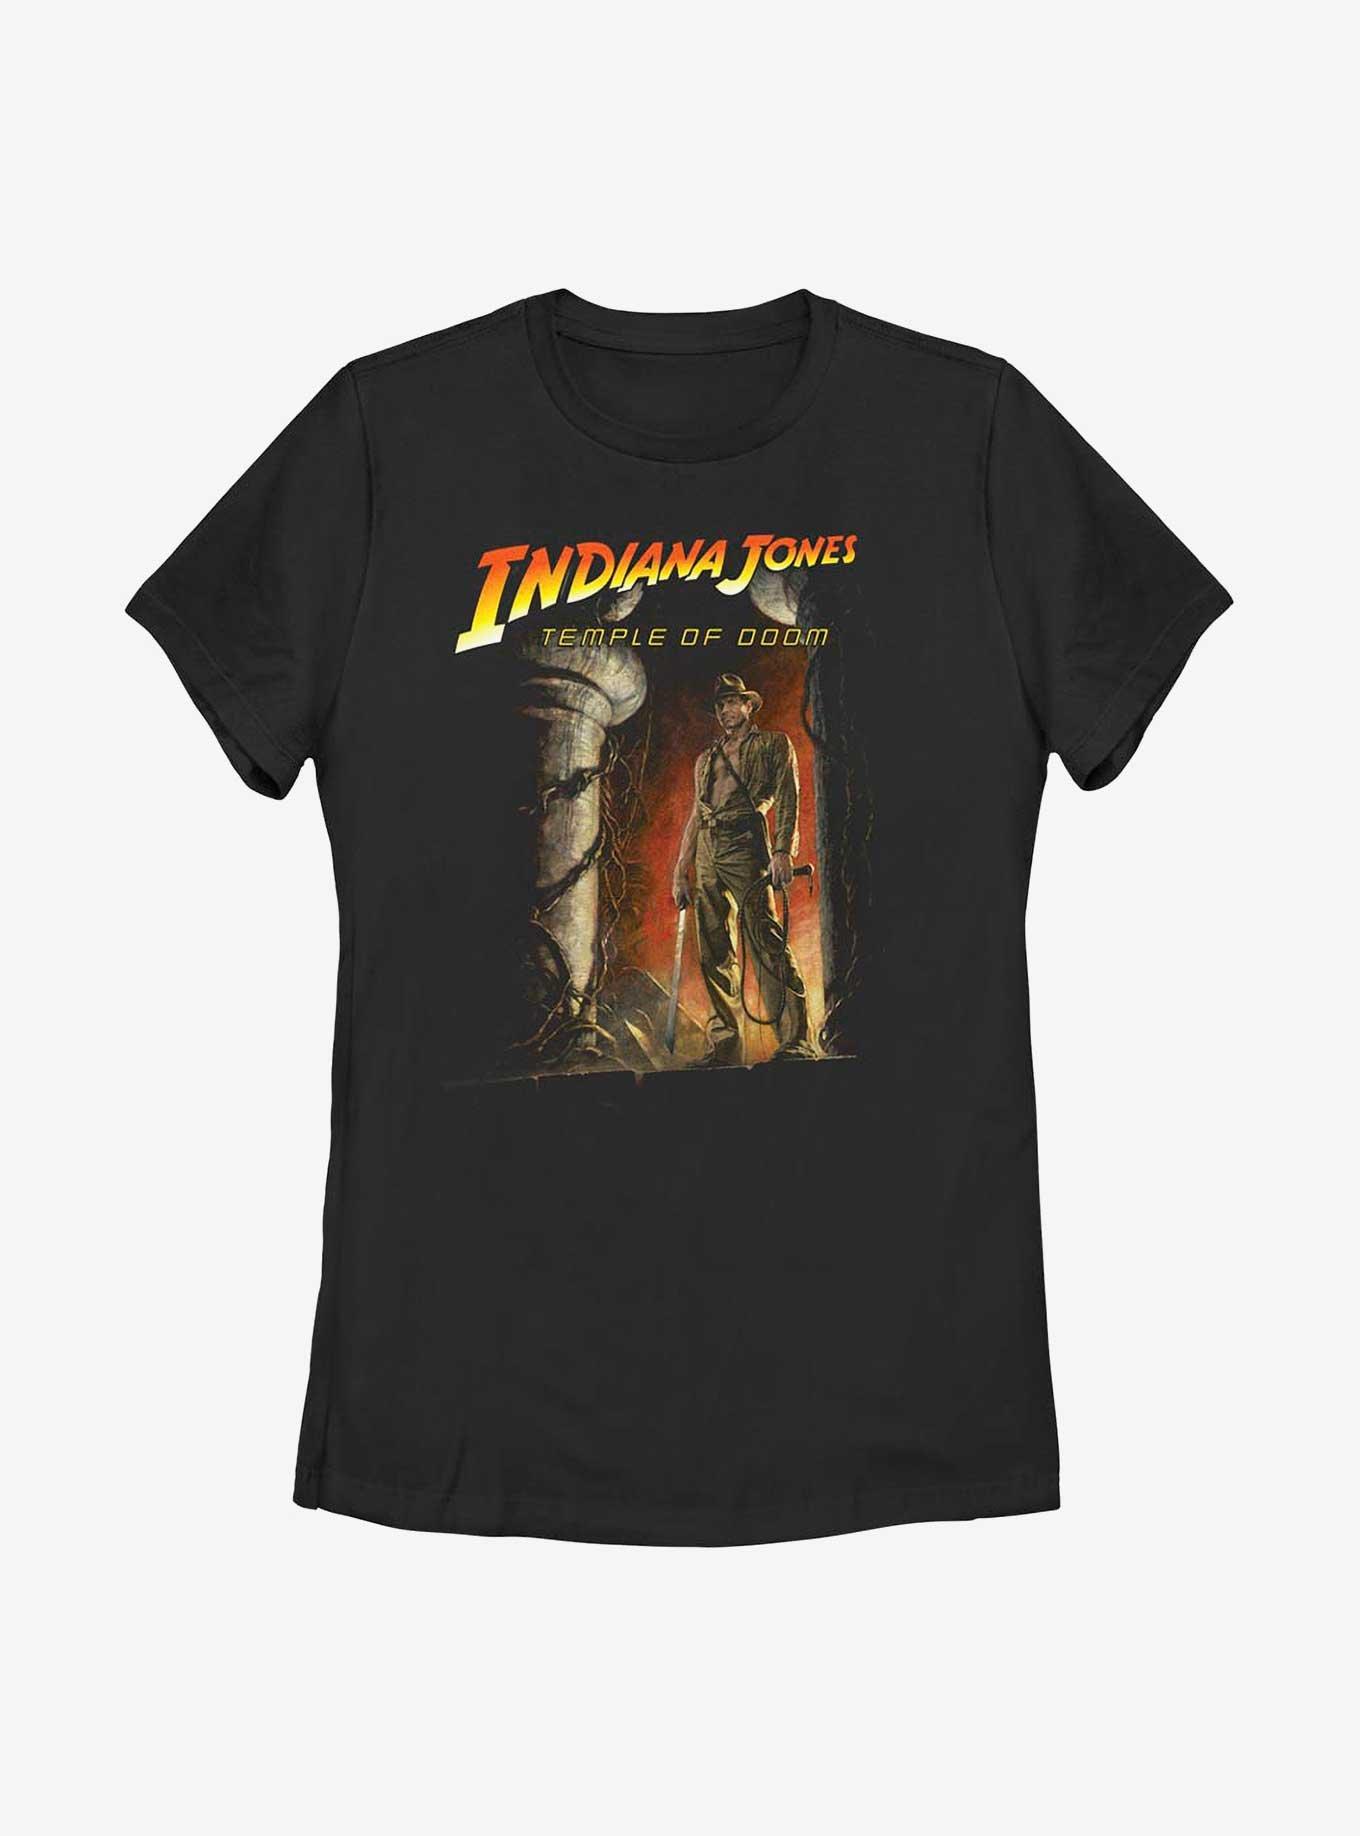 Indiana Jones and the Temple of Doom Poster Womens T-Shirt, BLACK, hi-res